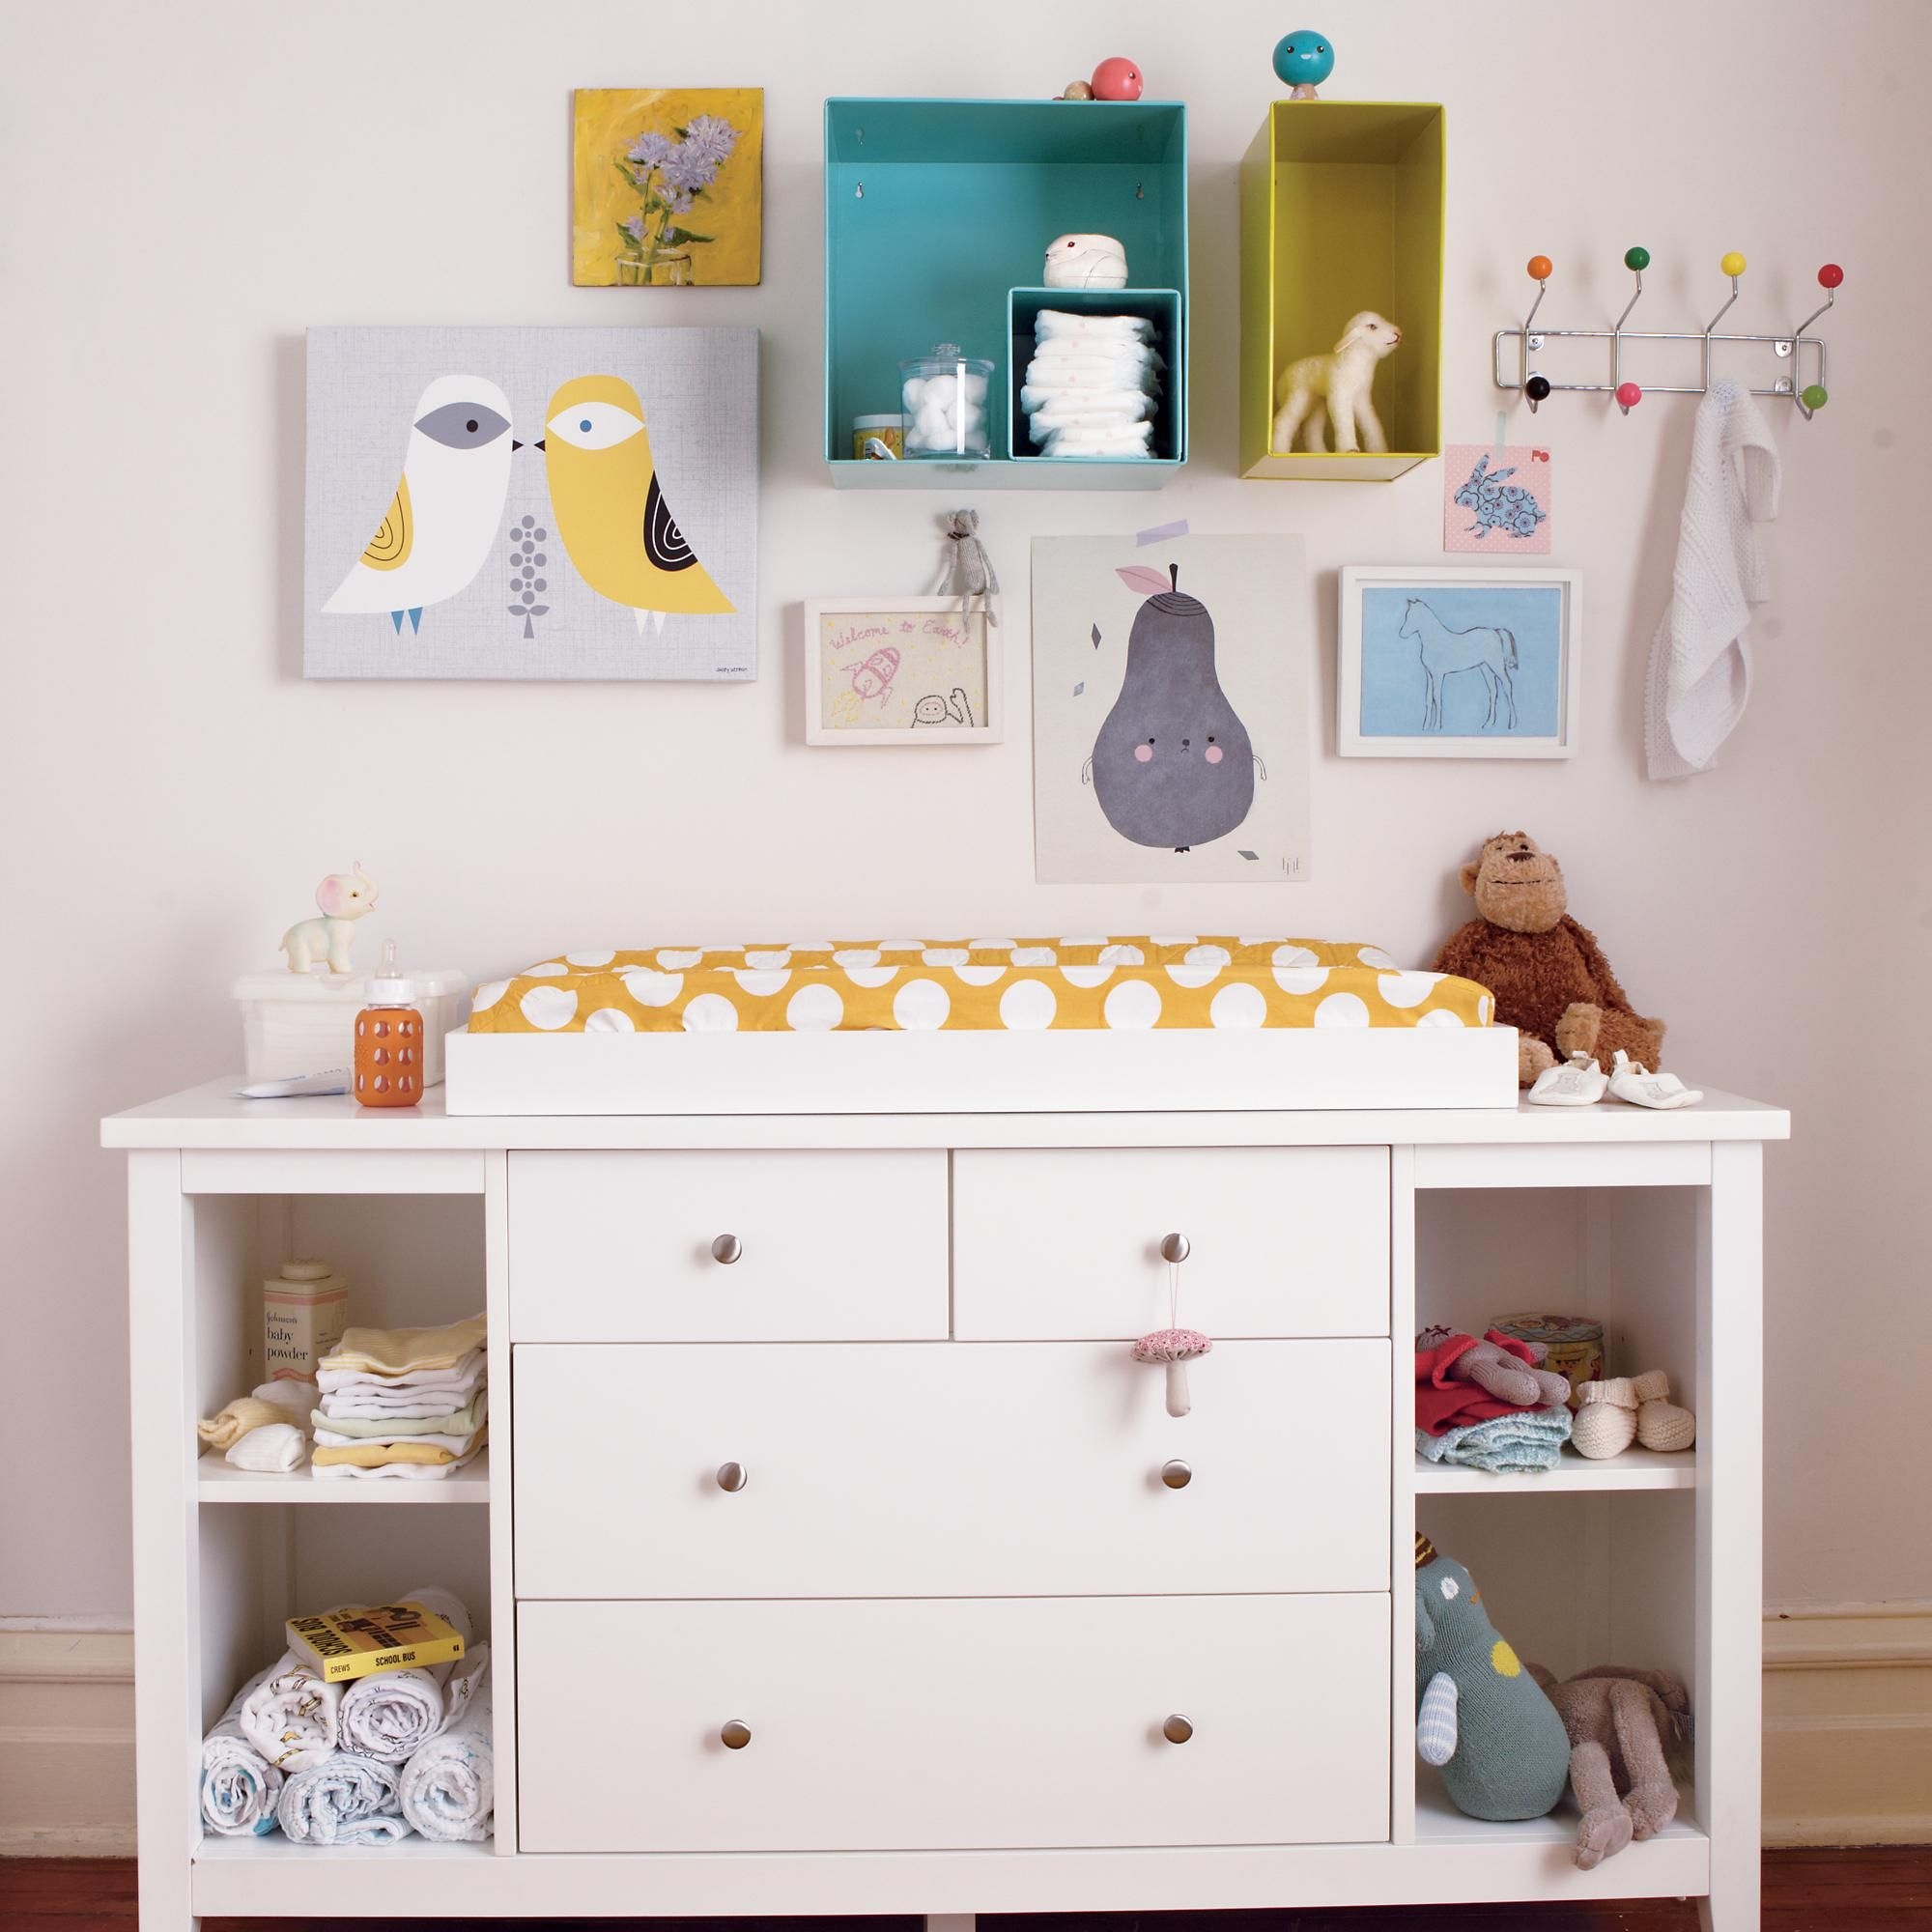 Dresser with shelves for books and a removable changing pad